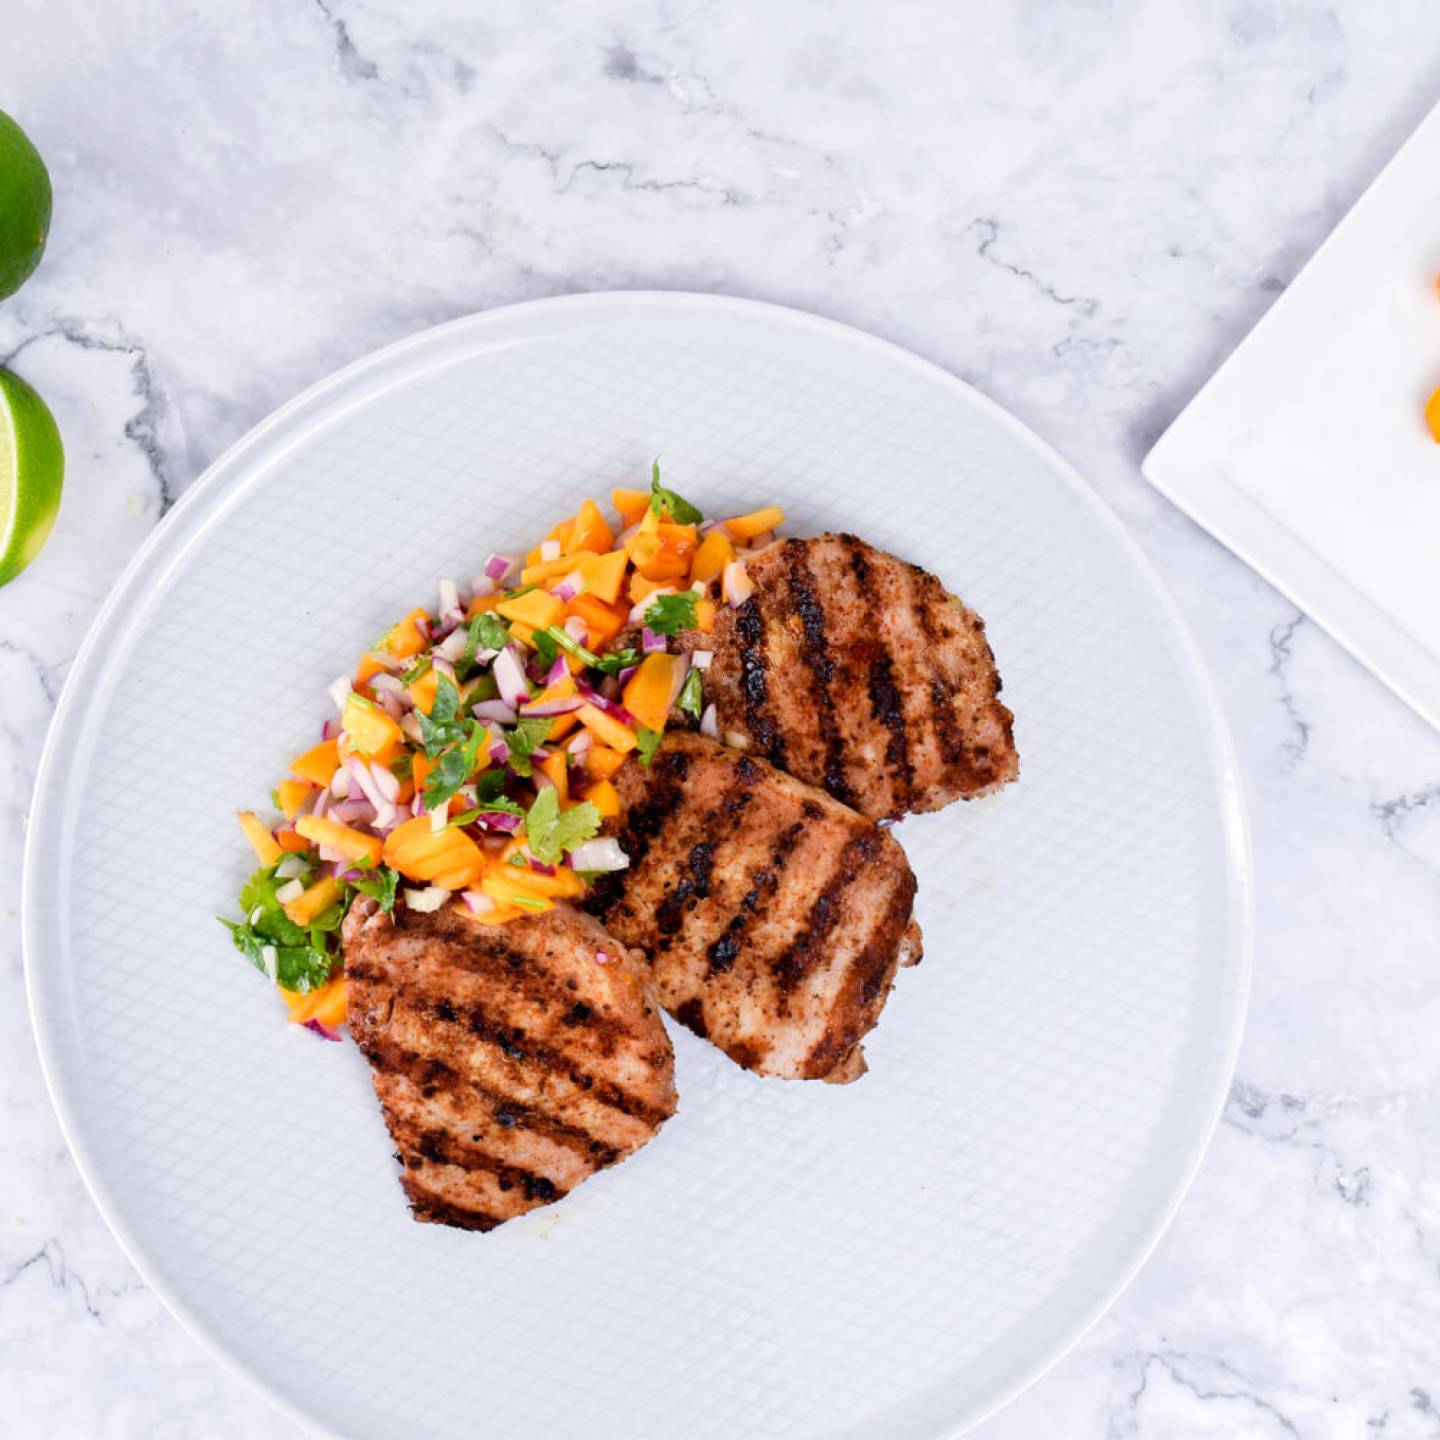 Grilled pork chops with peach salsa with fresh limes and peaches on the side.